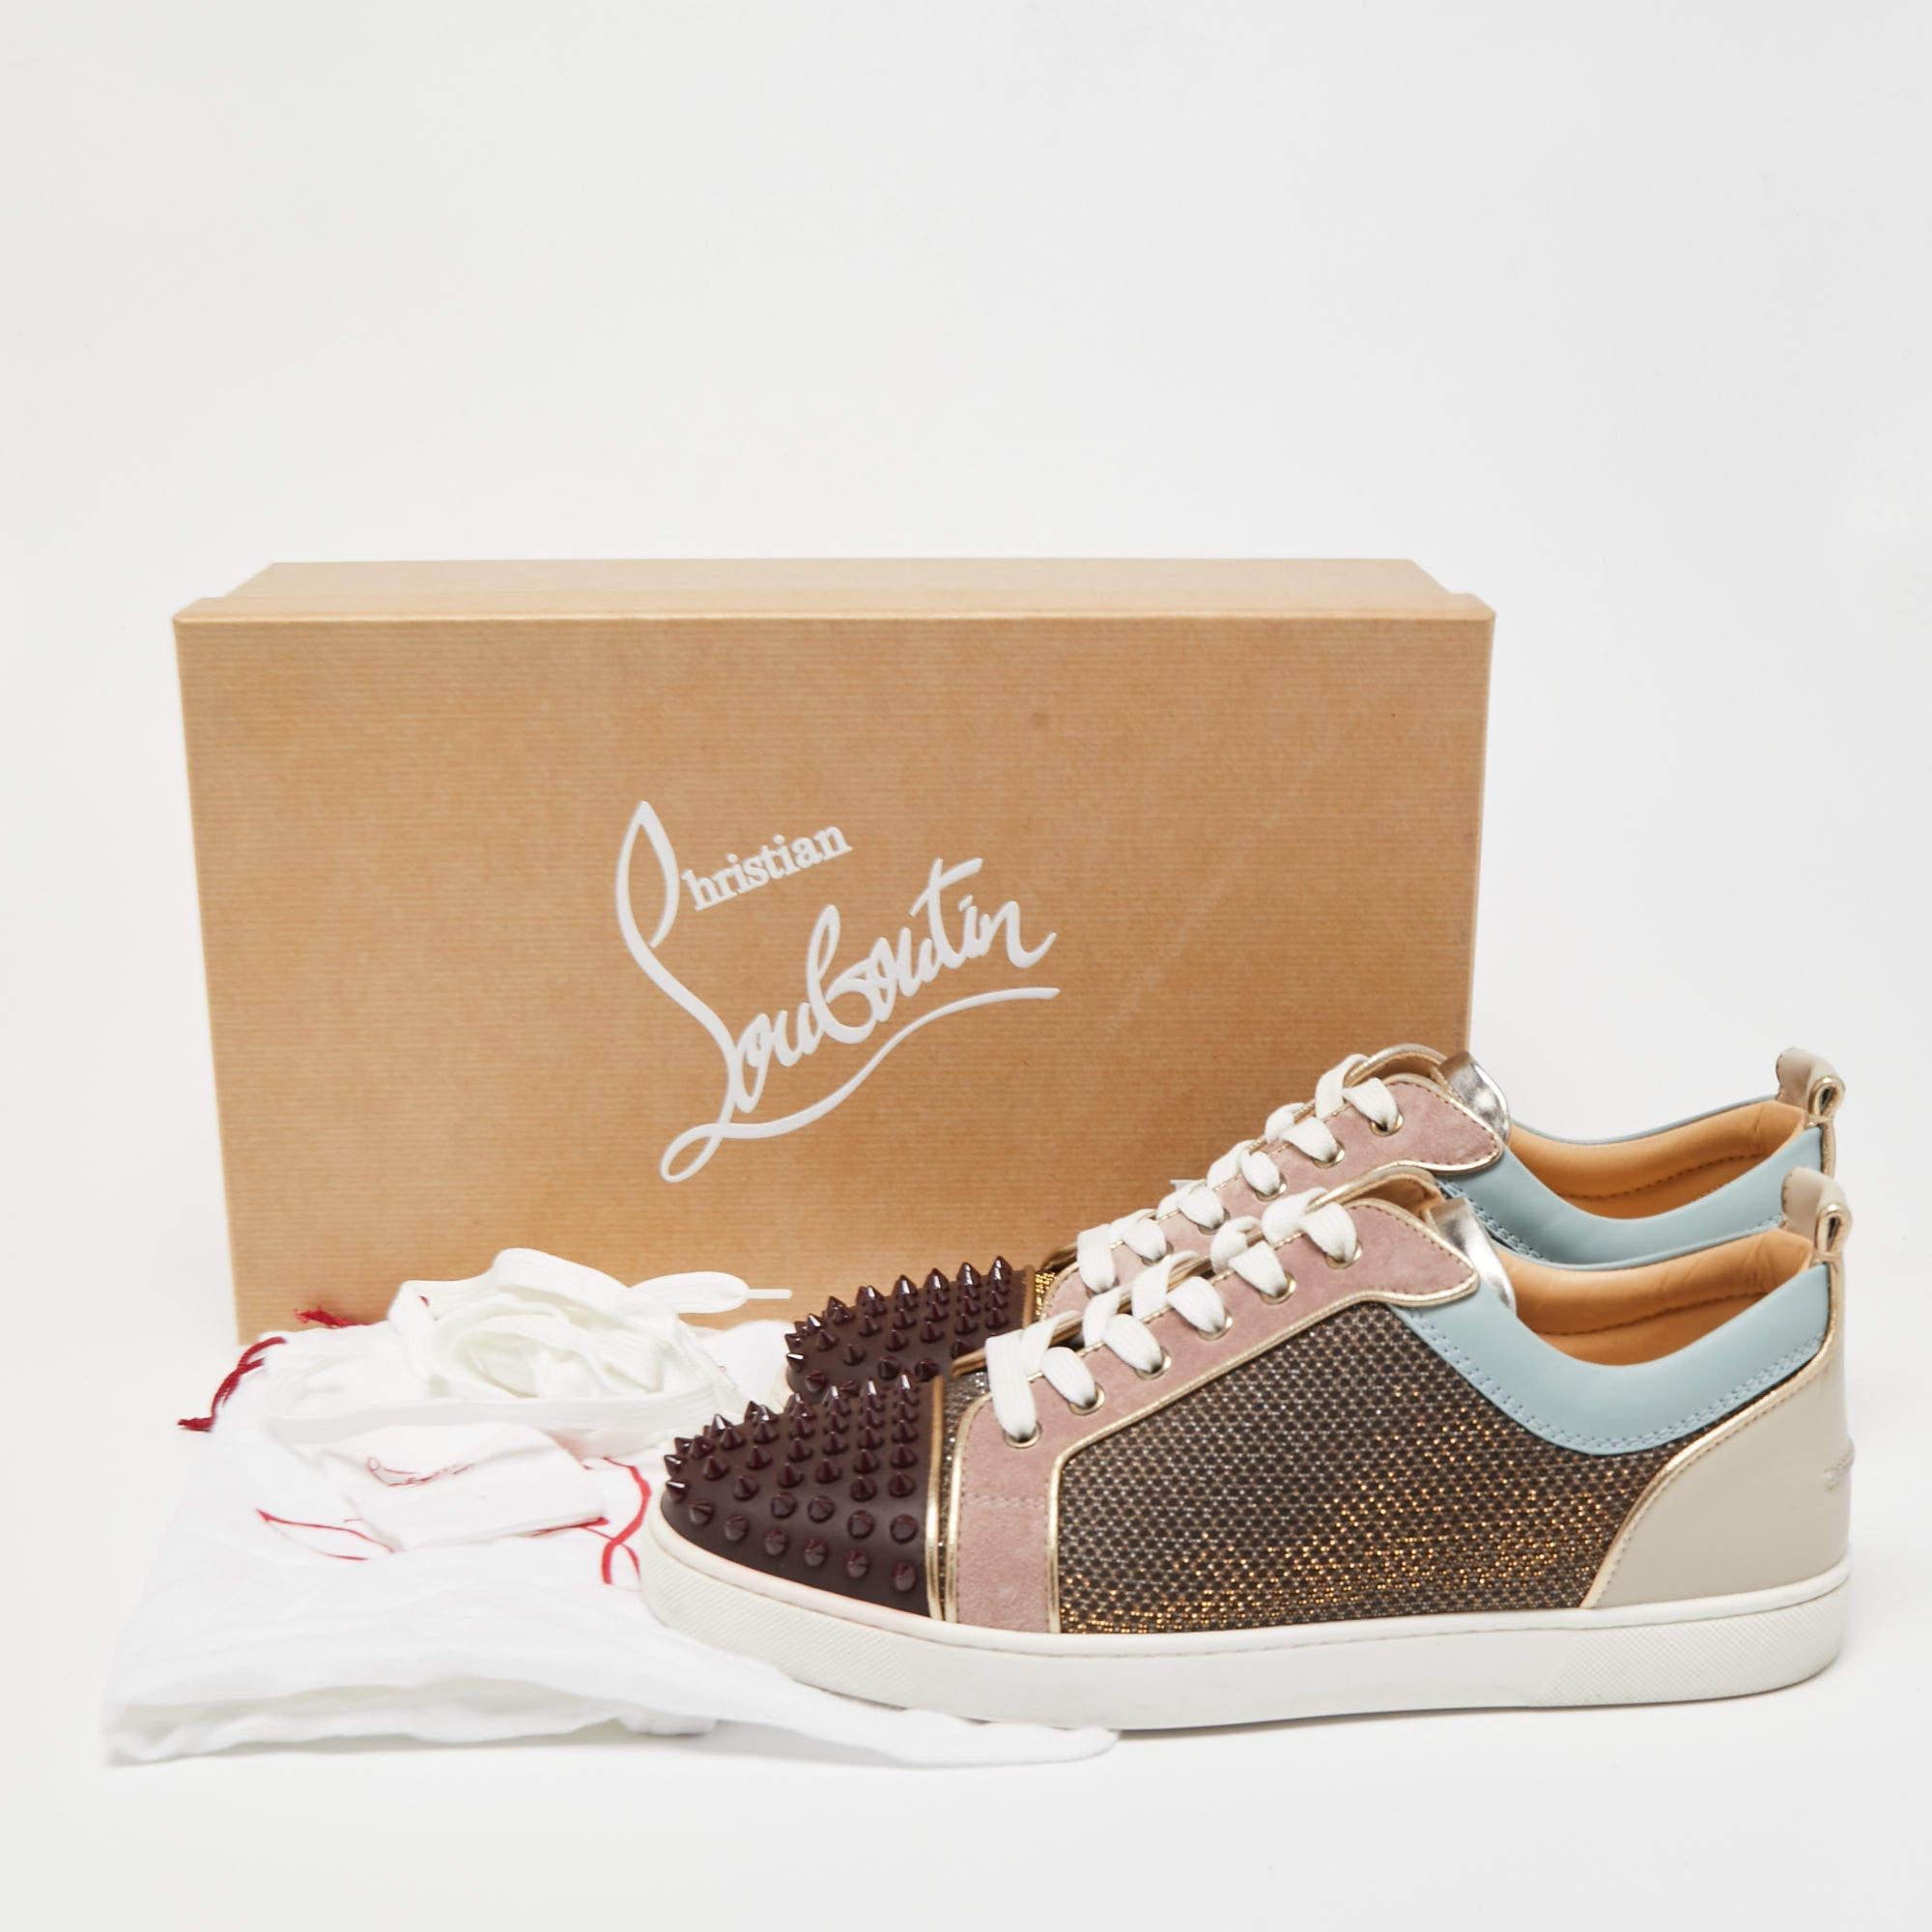 Christian Louboutin Glitter Mesh and Leather  Low Top Sneakers Size 42.5 5